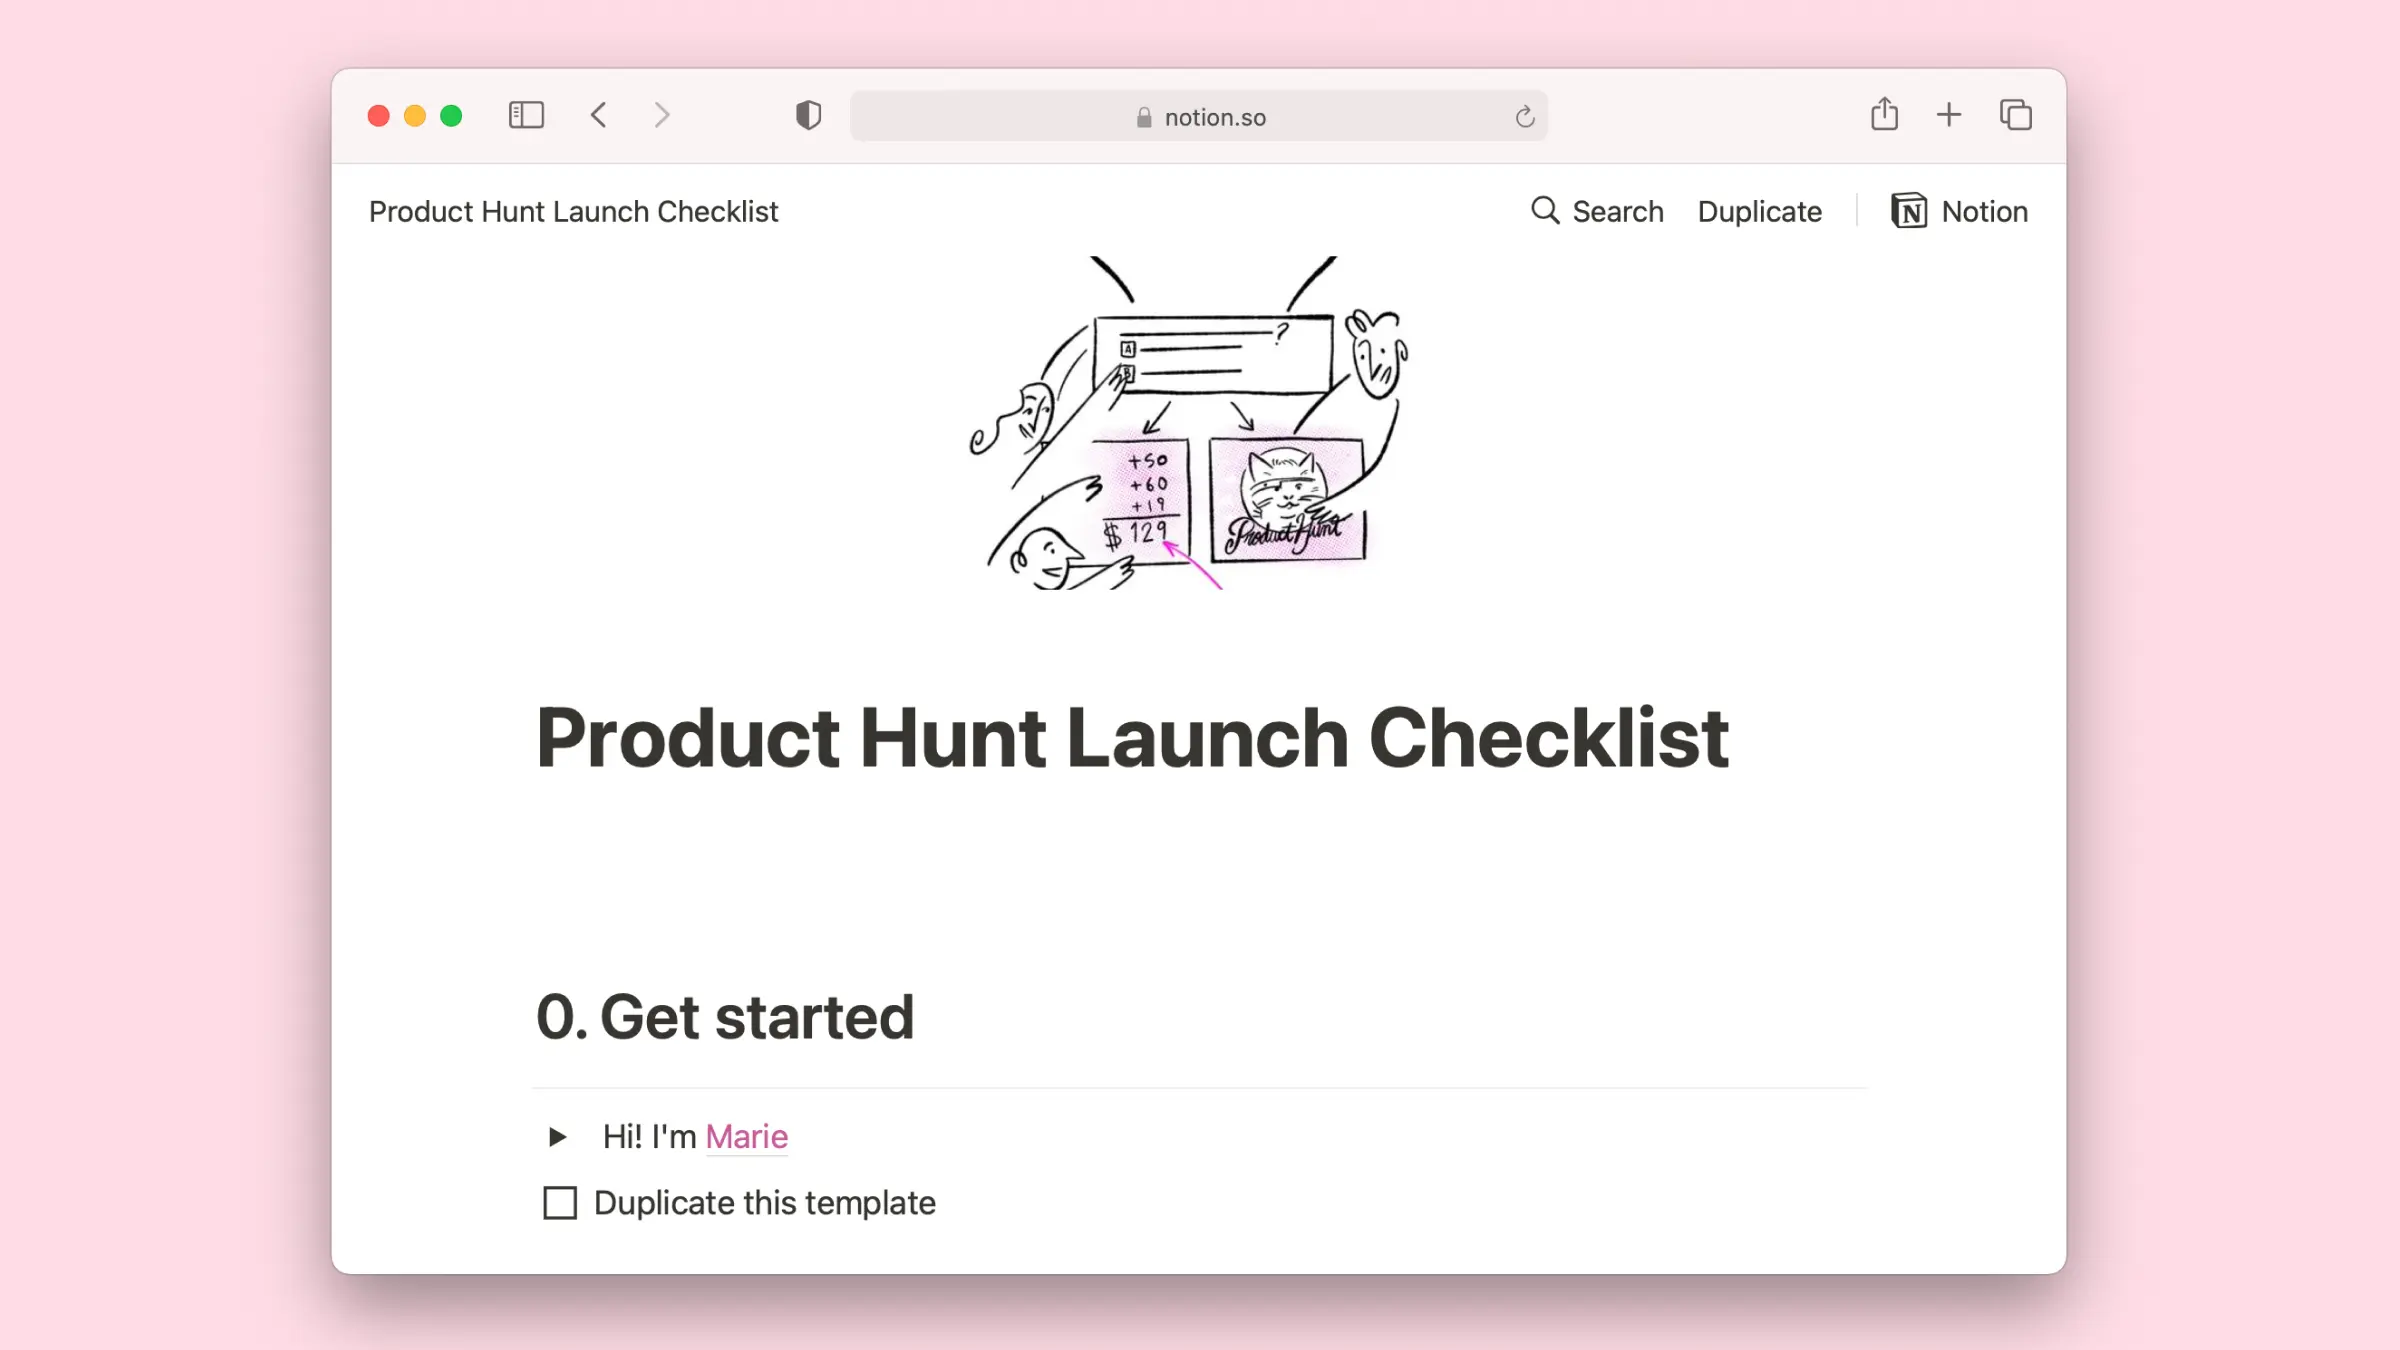 Product Hunt Launch Checklist image